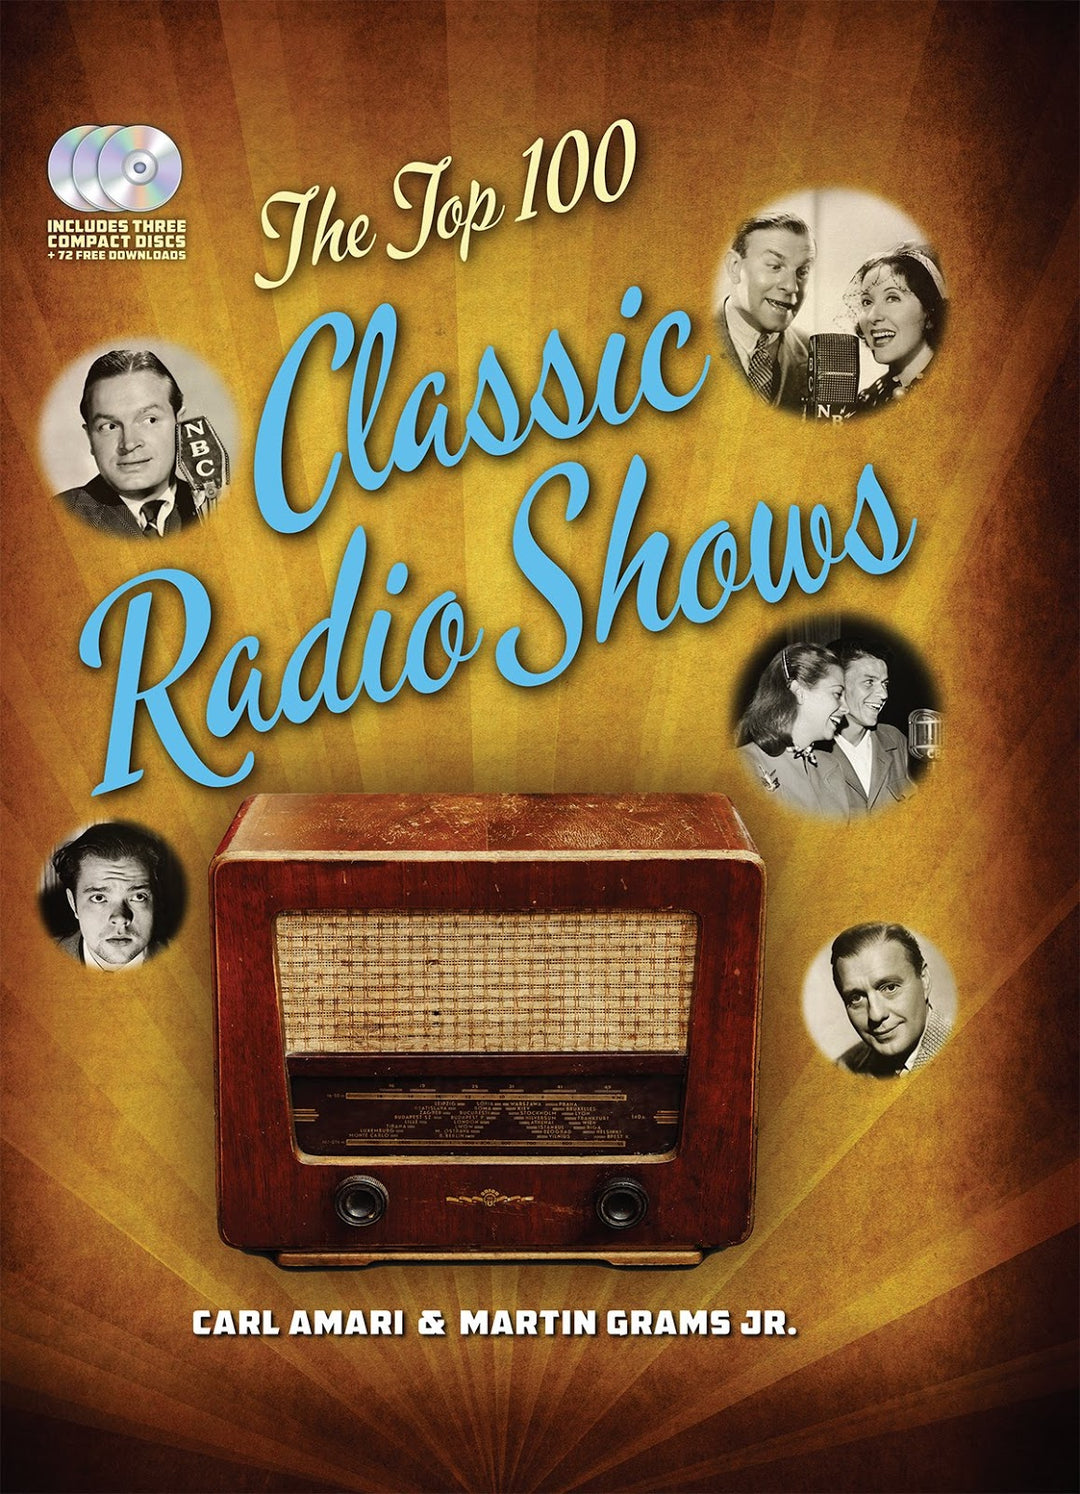 Top 100 Old-Time Radio Shows (autographed)